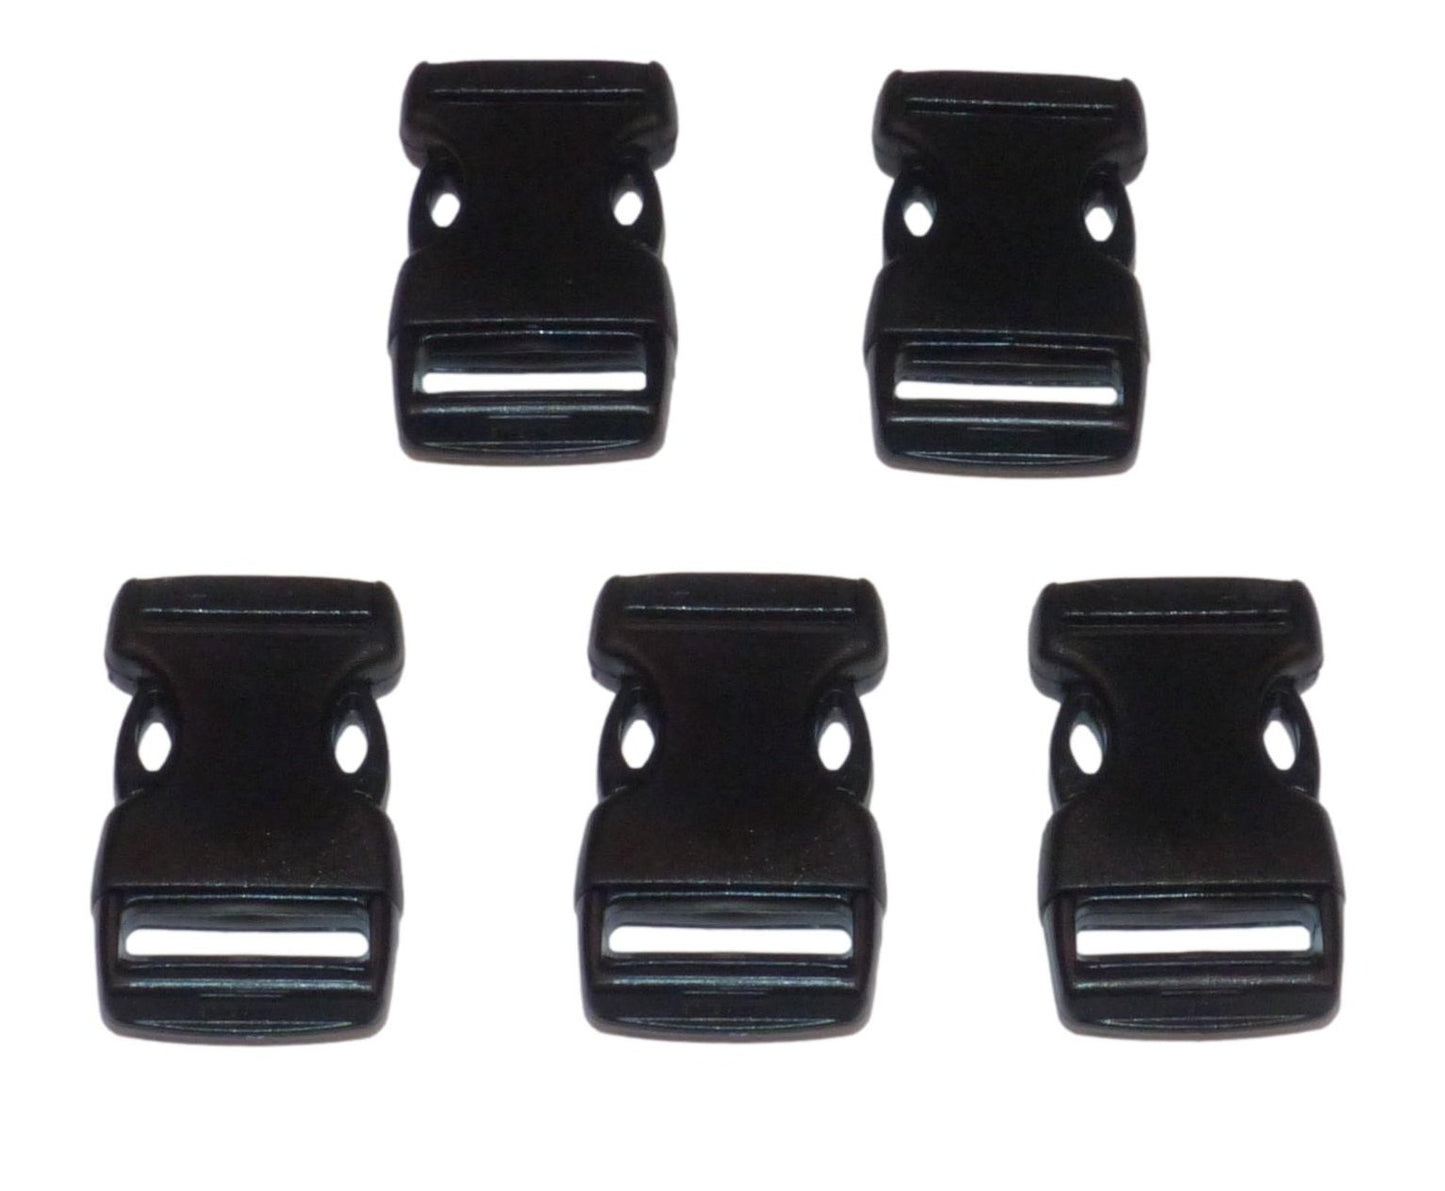 Benristraps 25mm plastic quick release buckle (pack of 5)